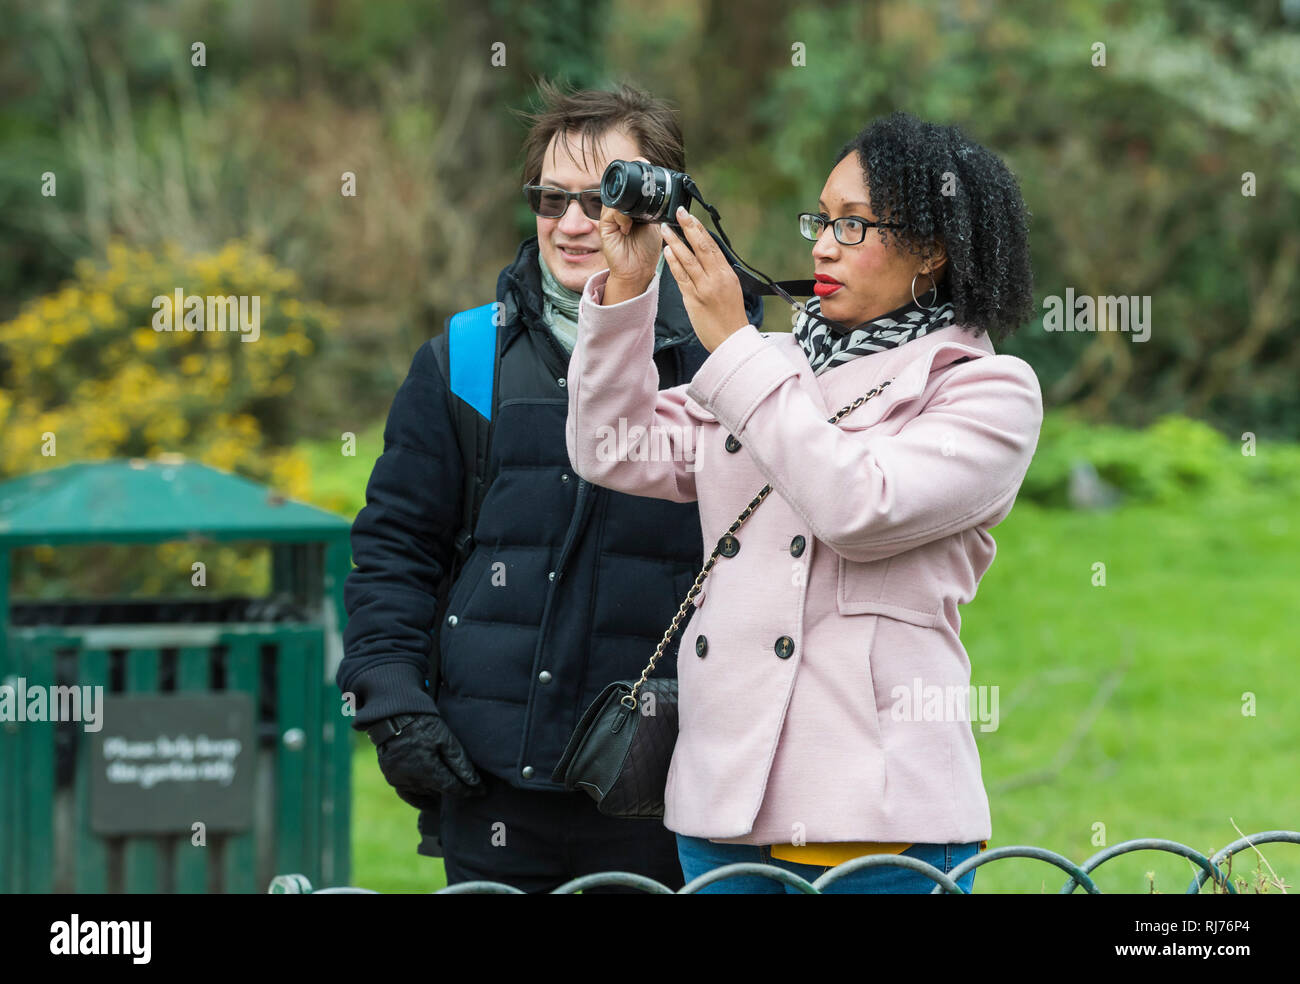 Mixed race couple of tourists taking photos of landmarks in the UK. Stock Photo